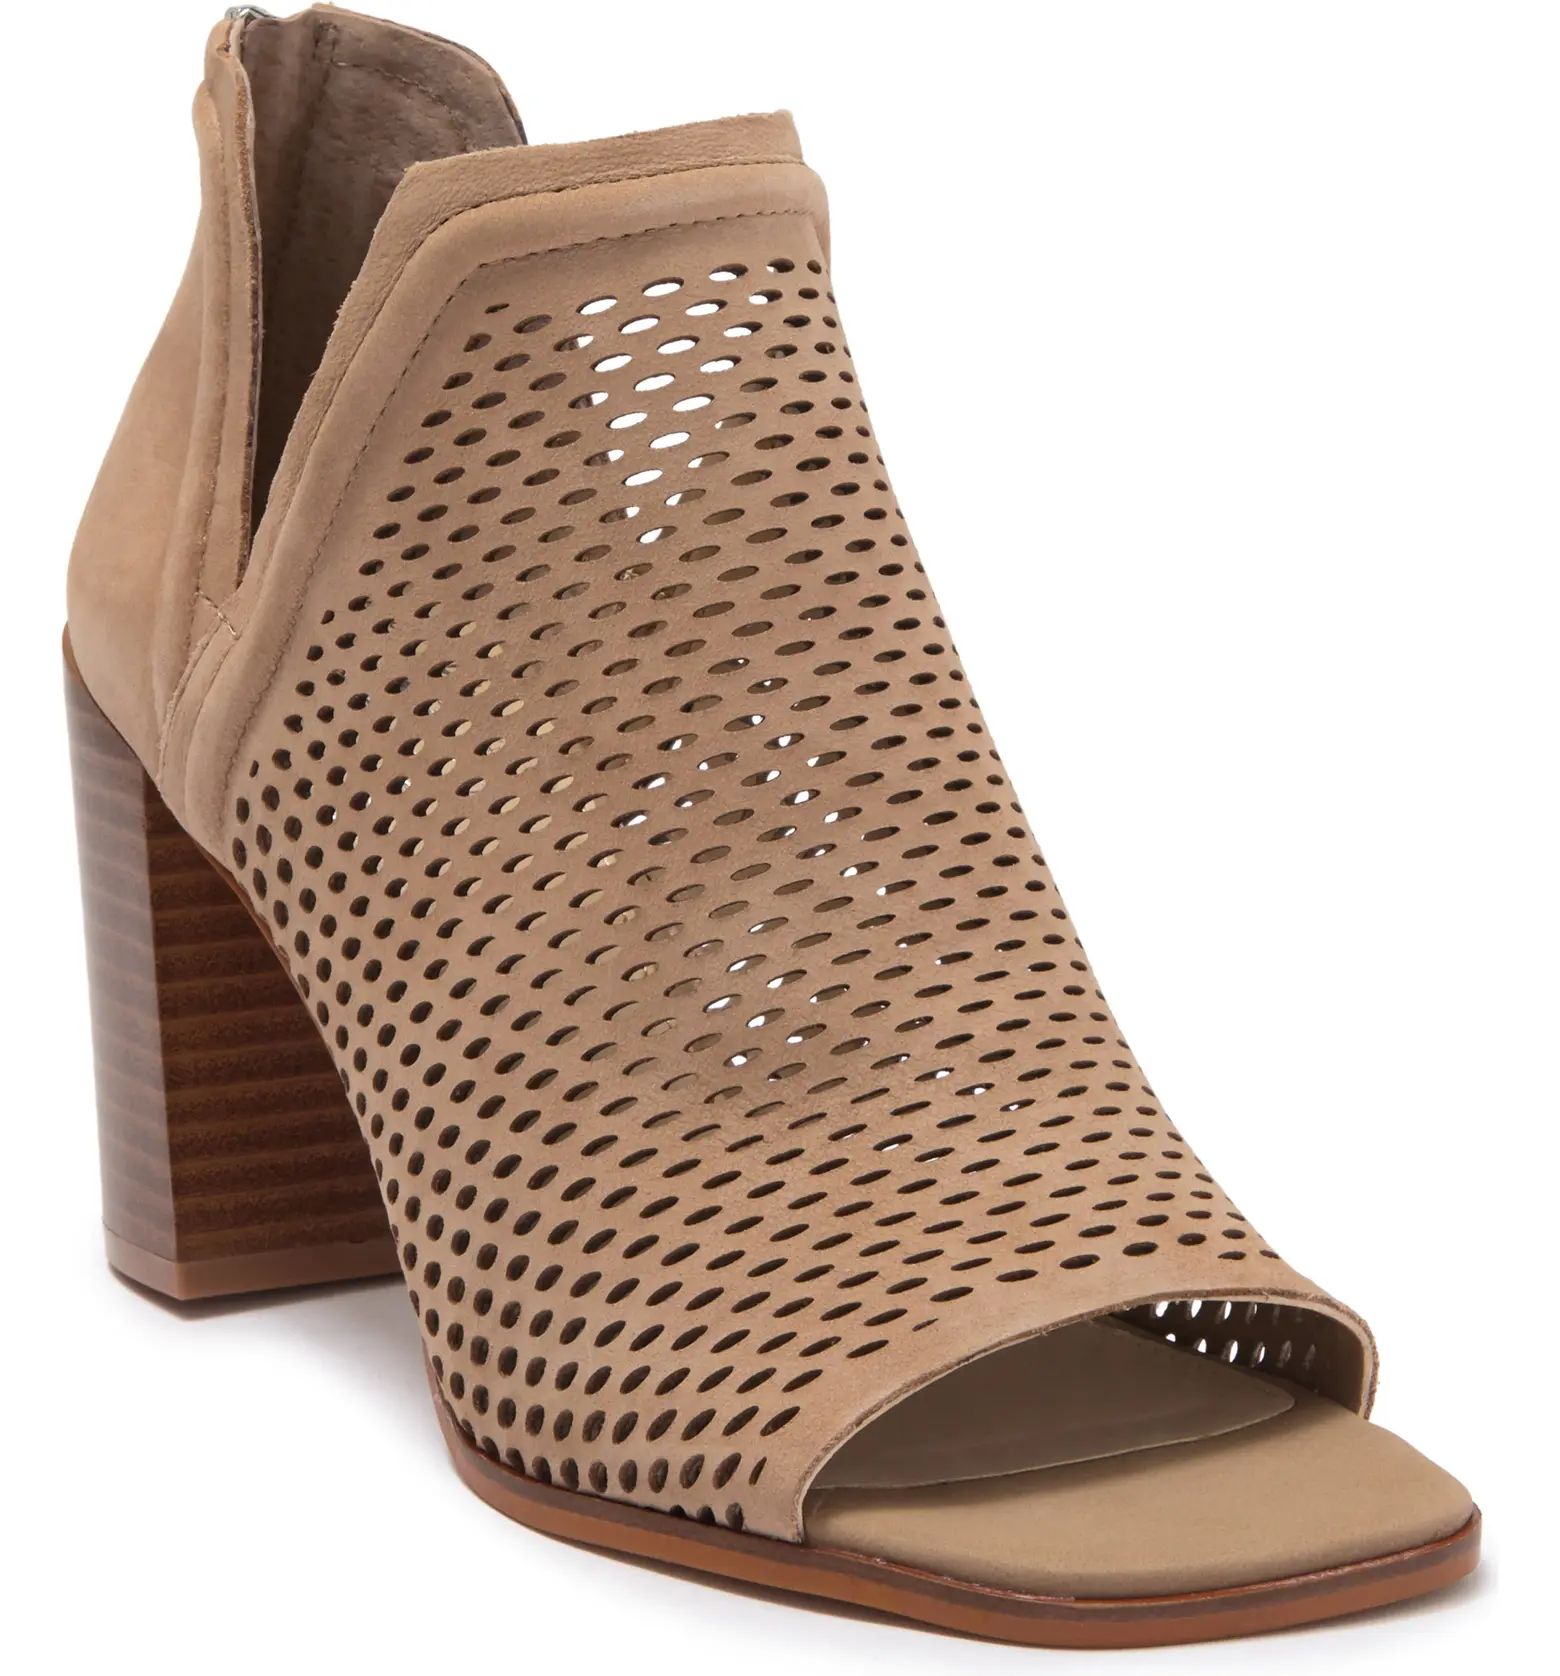 Katnina Perforated Leather Bootie | Nordstrom Rack